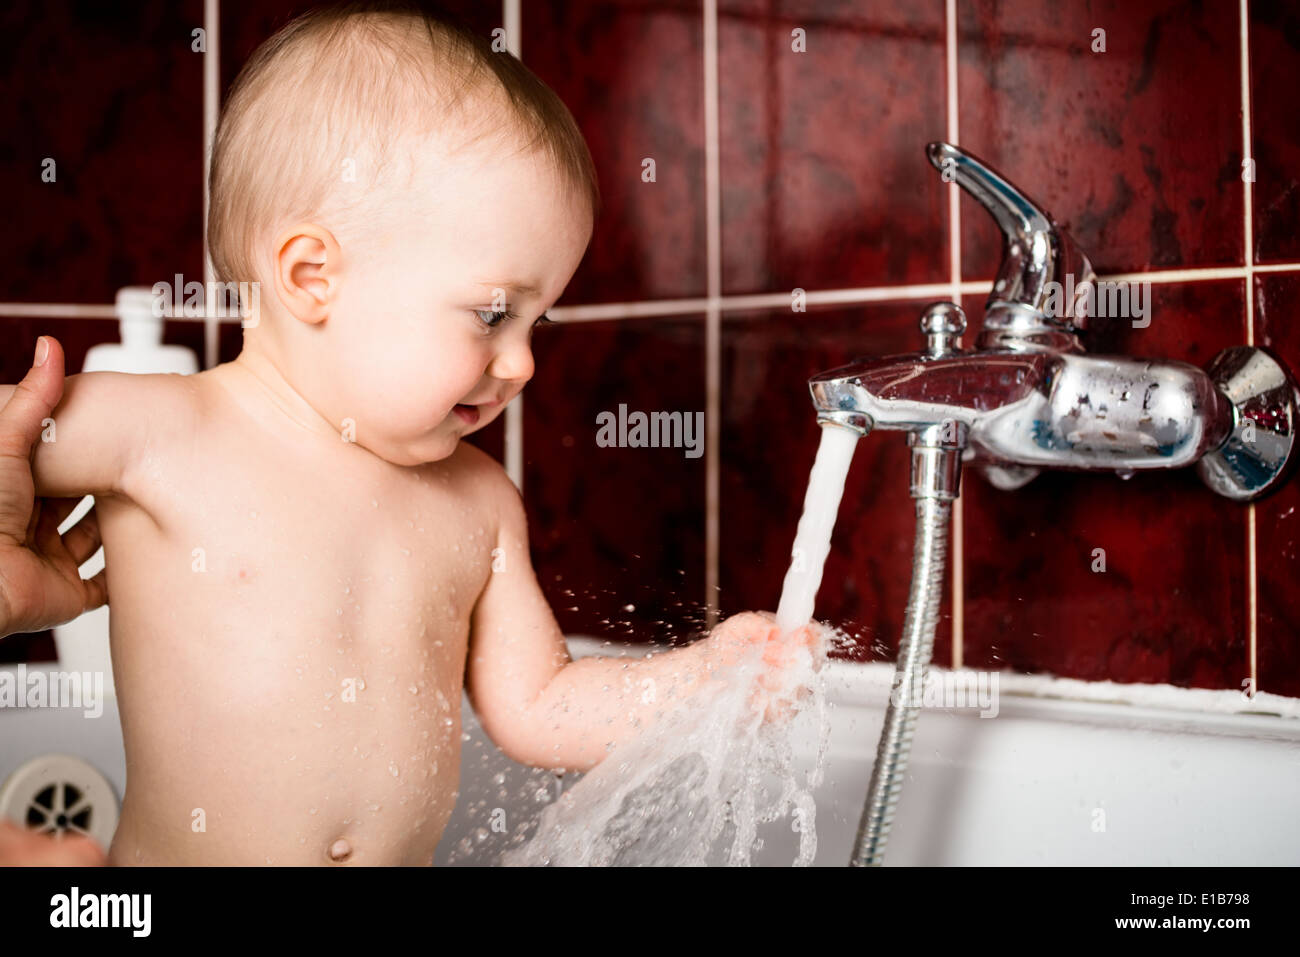 Cute baby playing with water tap in bathroom Stock Photo